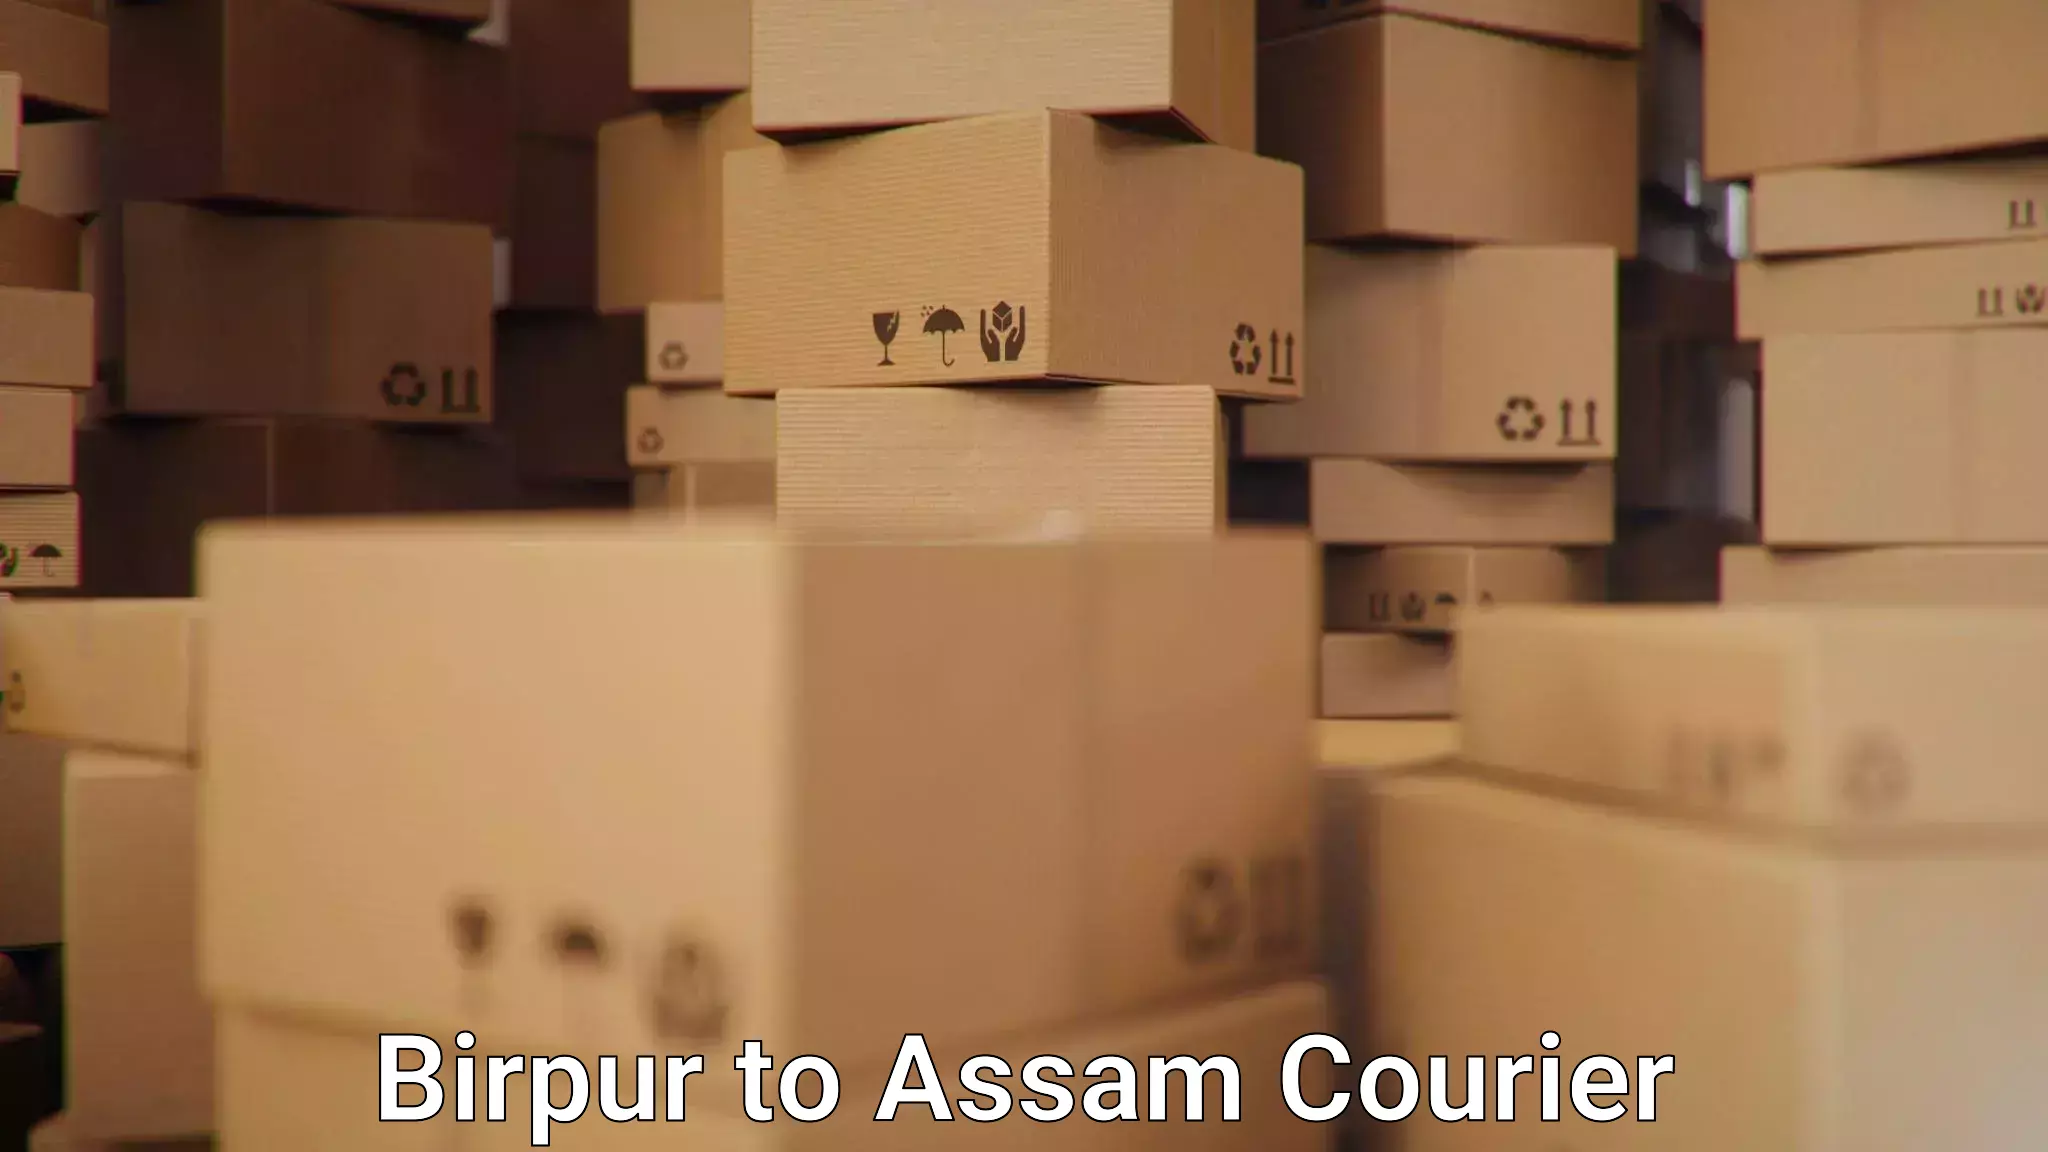 Pharmaceutical courier Birpur to Jorhat